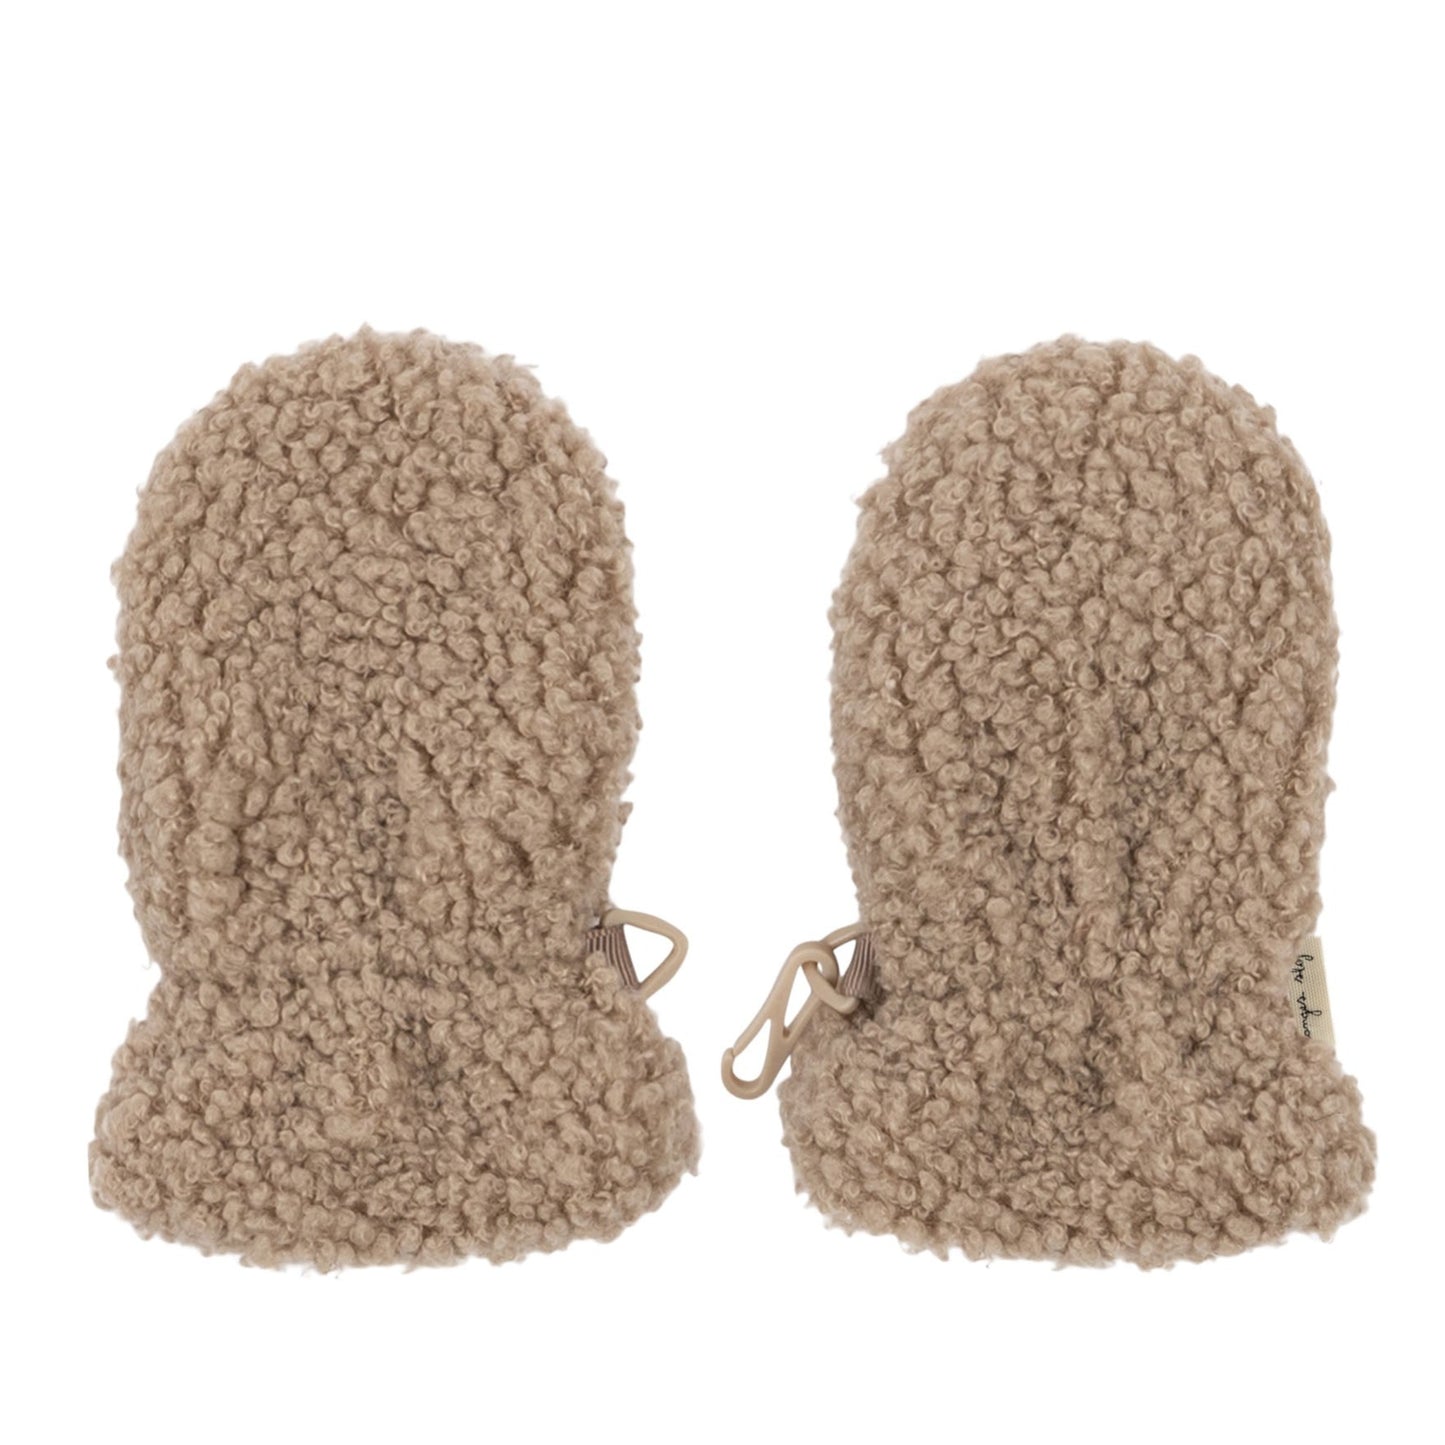 Grizzly Teddy Bear Mittens